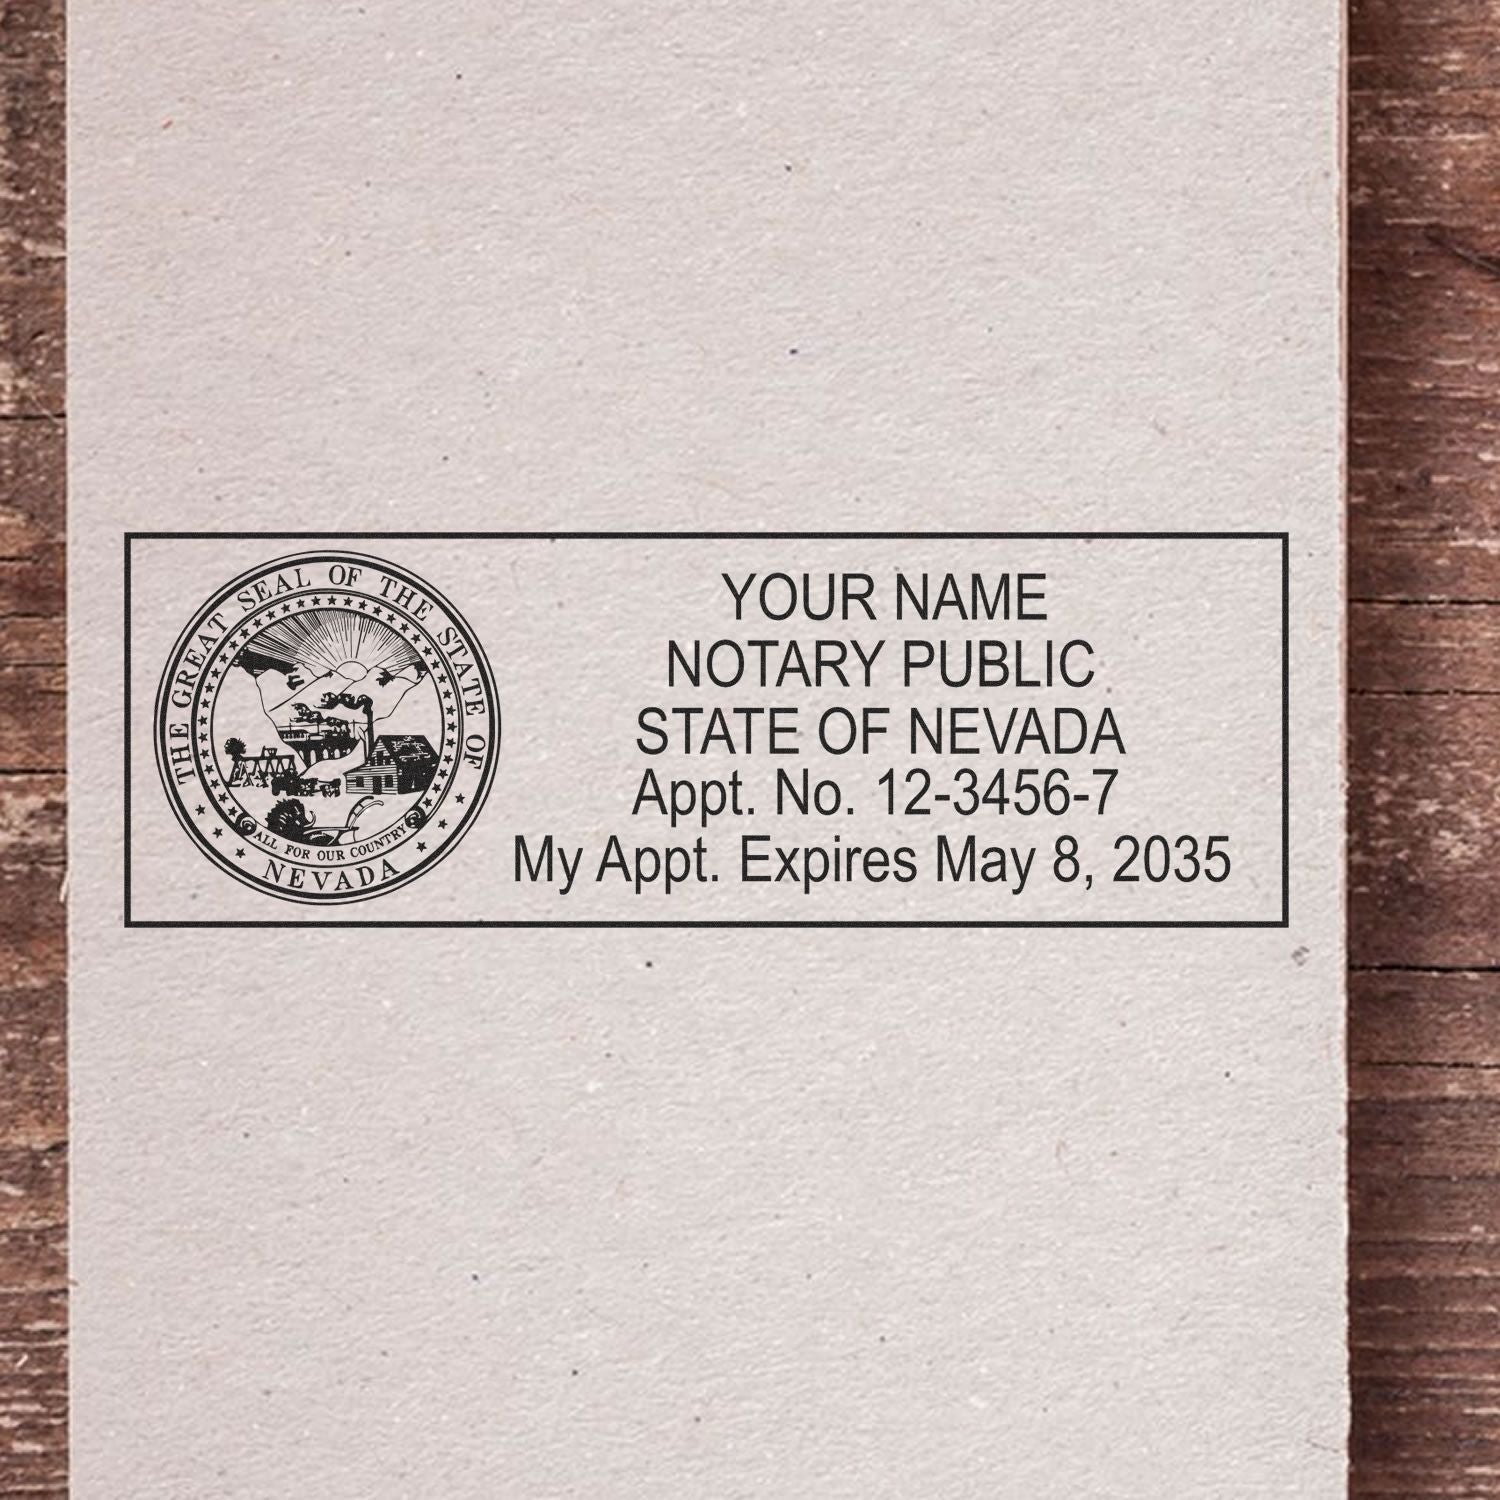 The main image for the Wooden Handle Nevada State Seal Notary Public Stamp depicting a sample of the imprint and electronic files